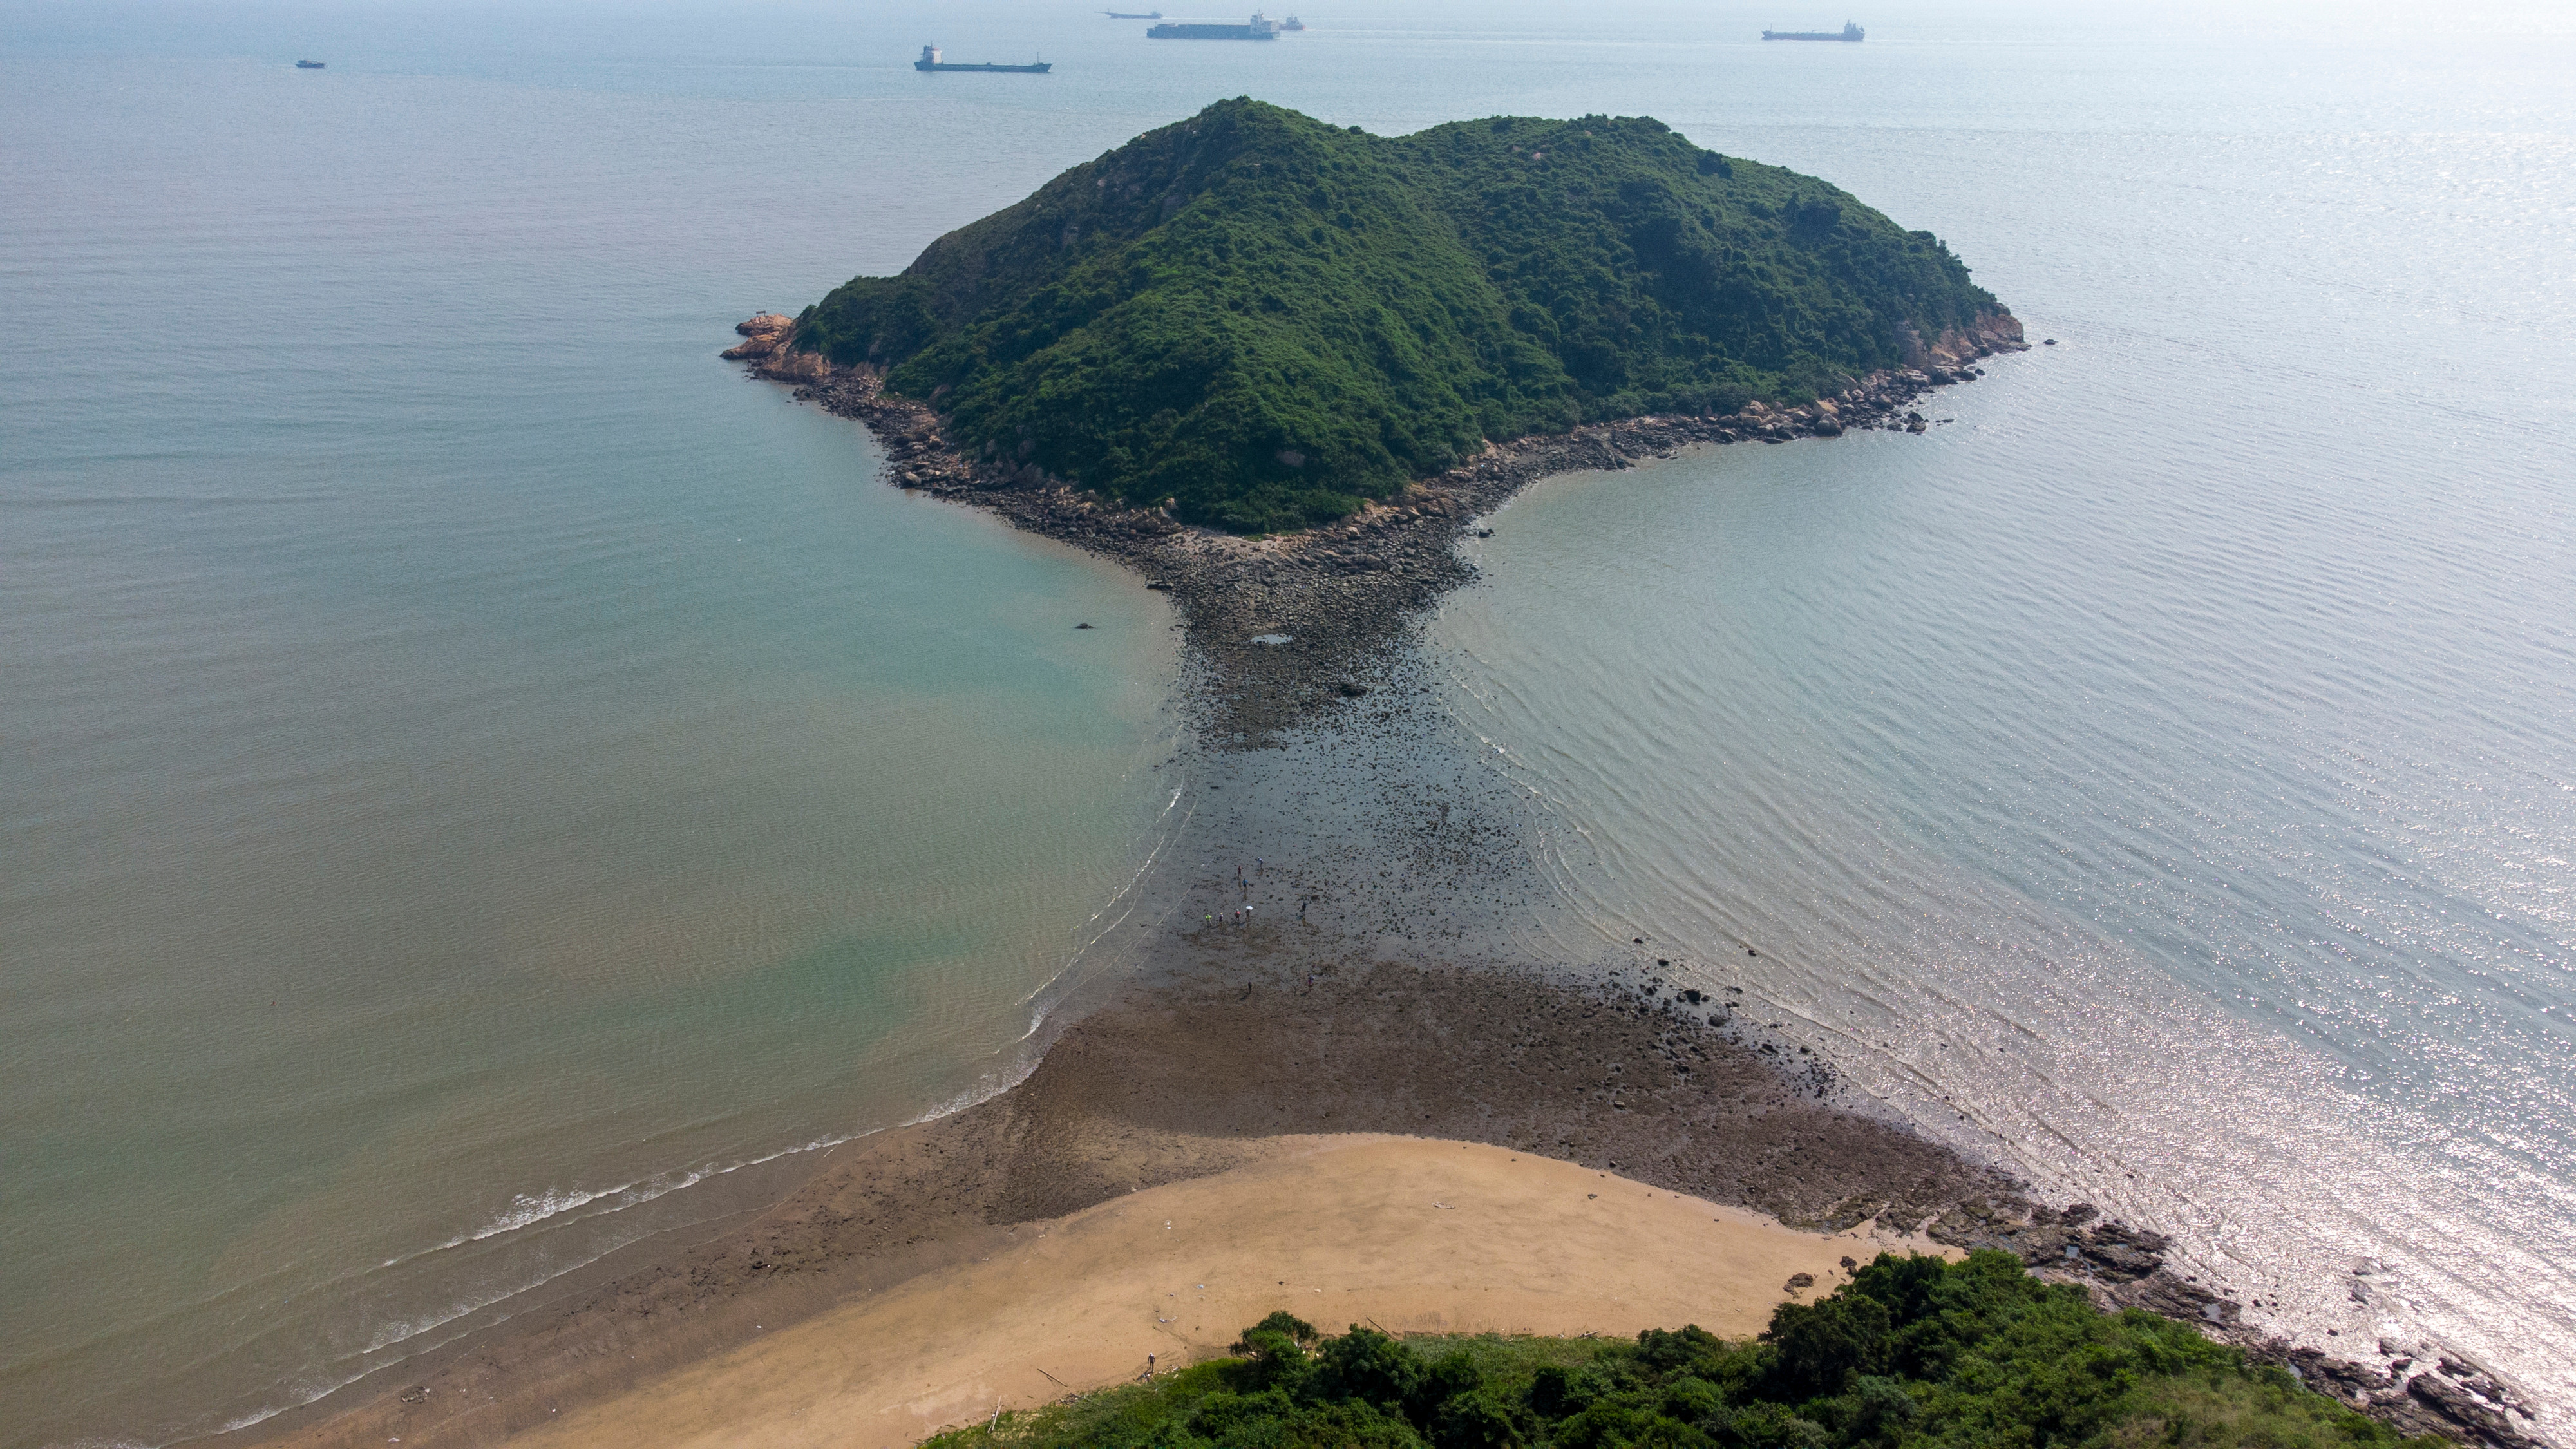 The men were found on Peaked Hill, off Hong Kong’s Lantau Island. Photo: Shutterstock